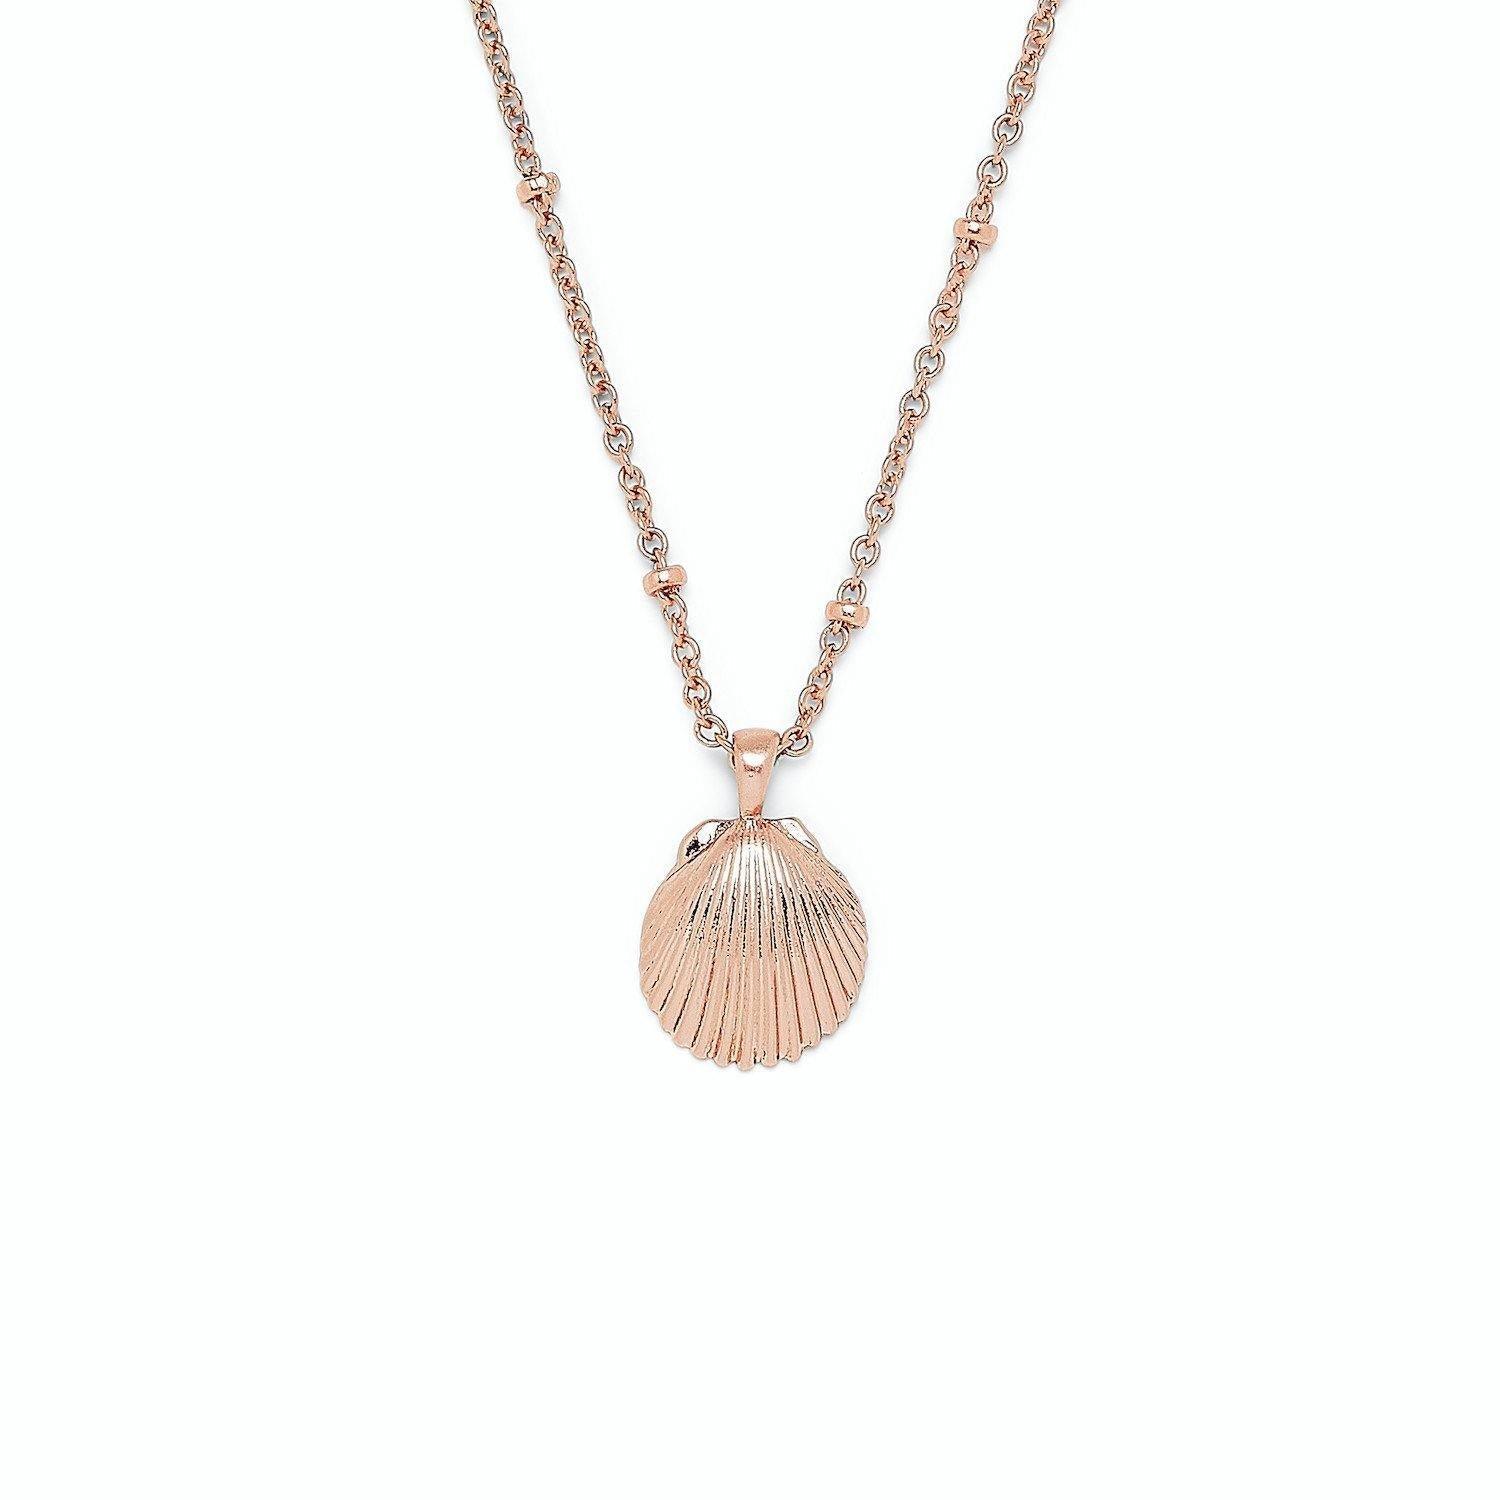 Puravida Necklace Collection 2 - The Salty Mare